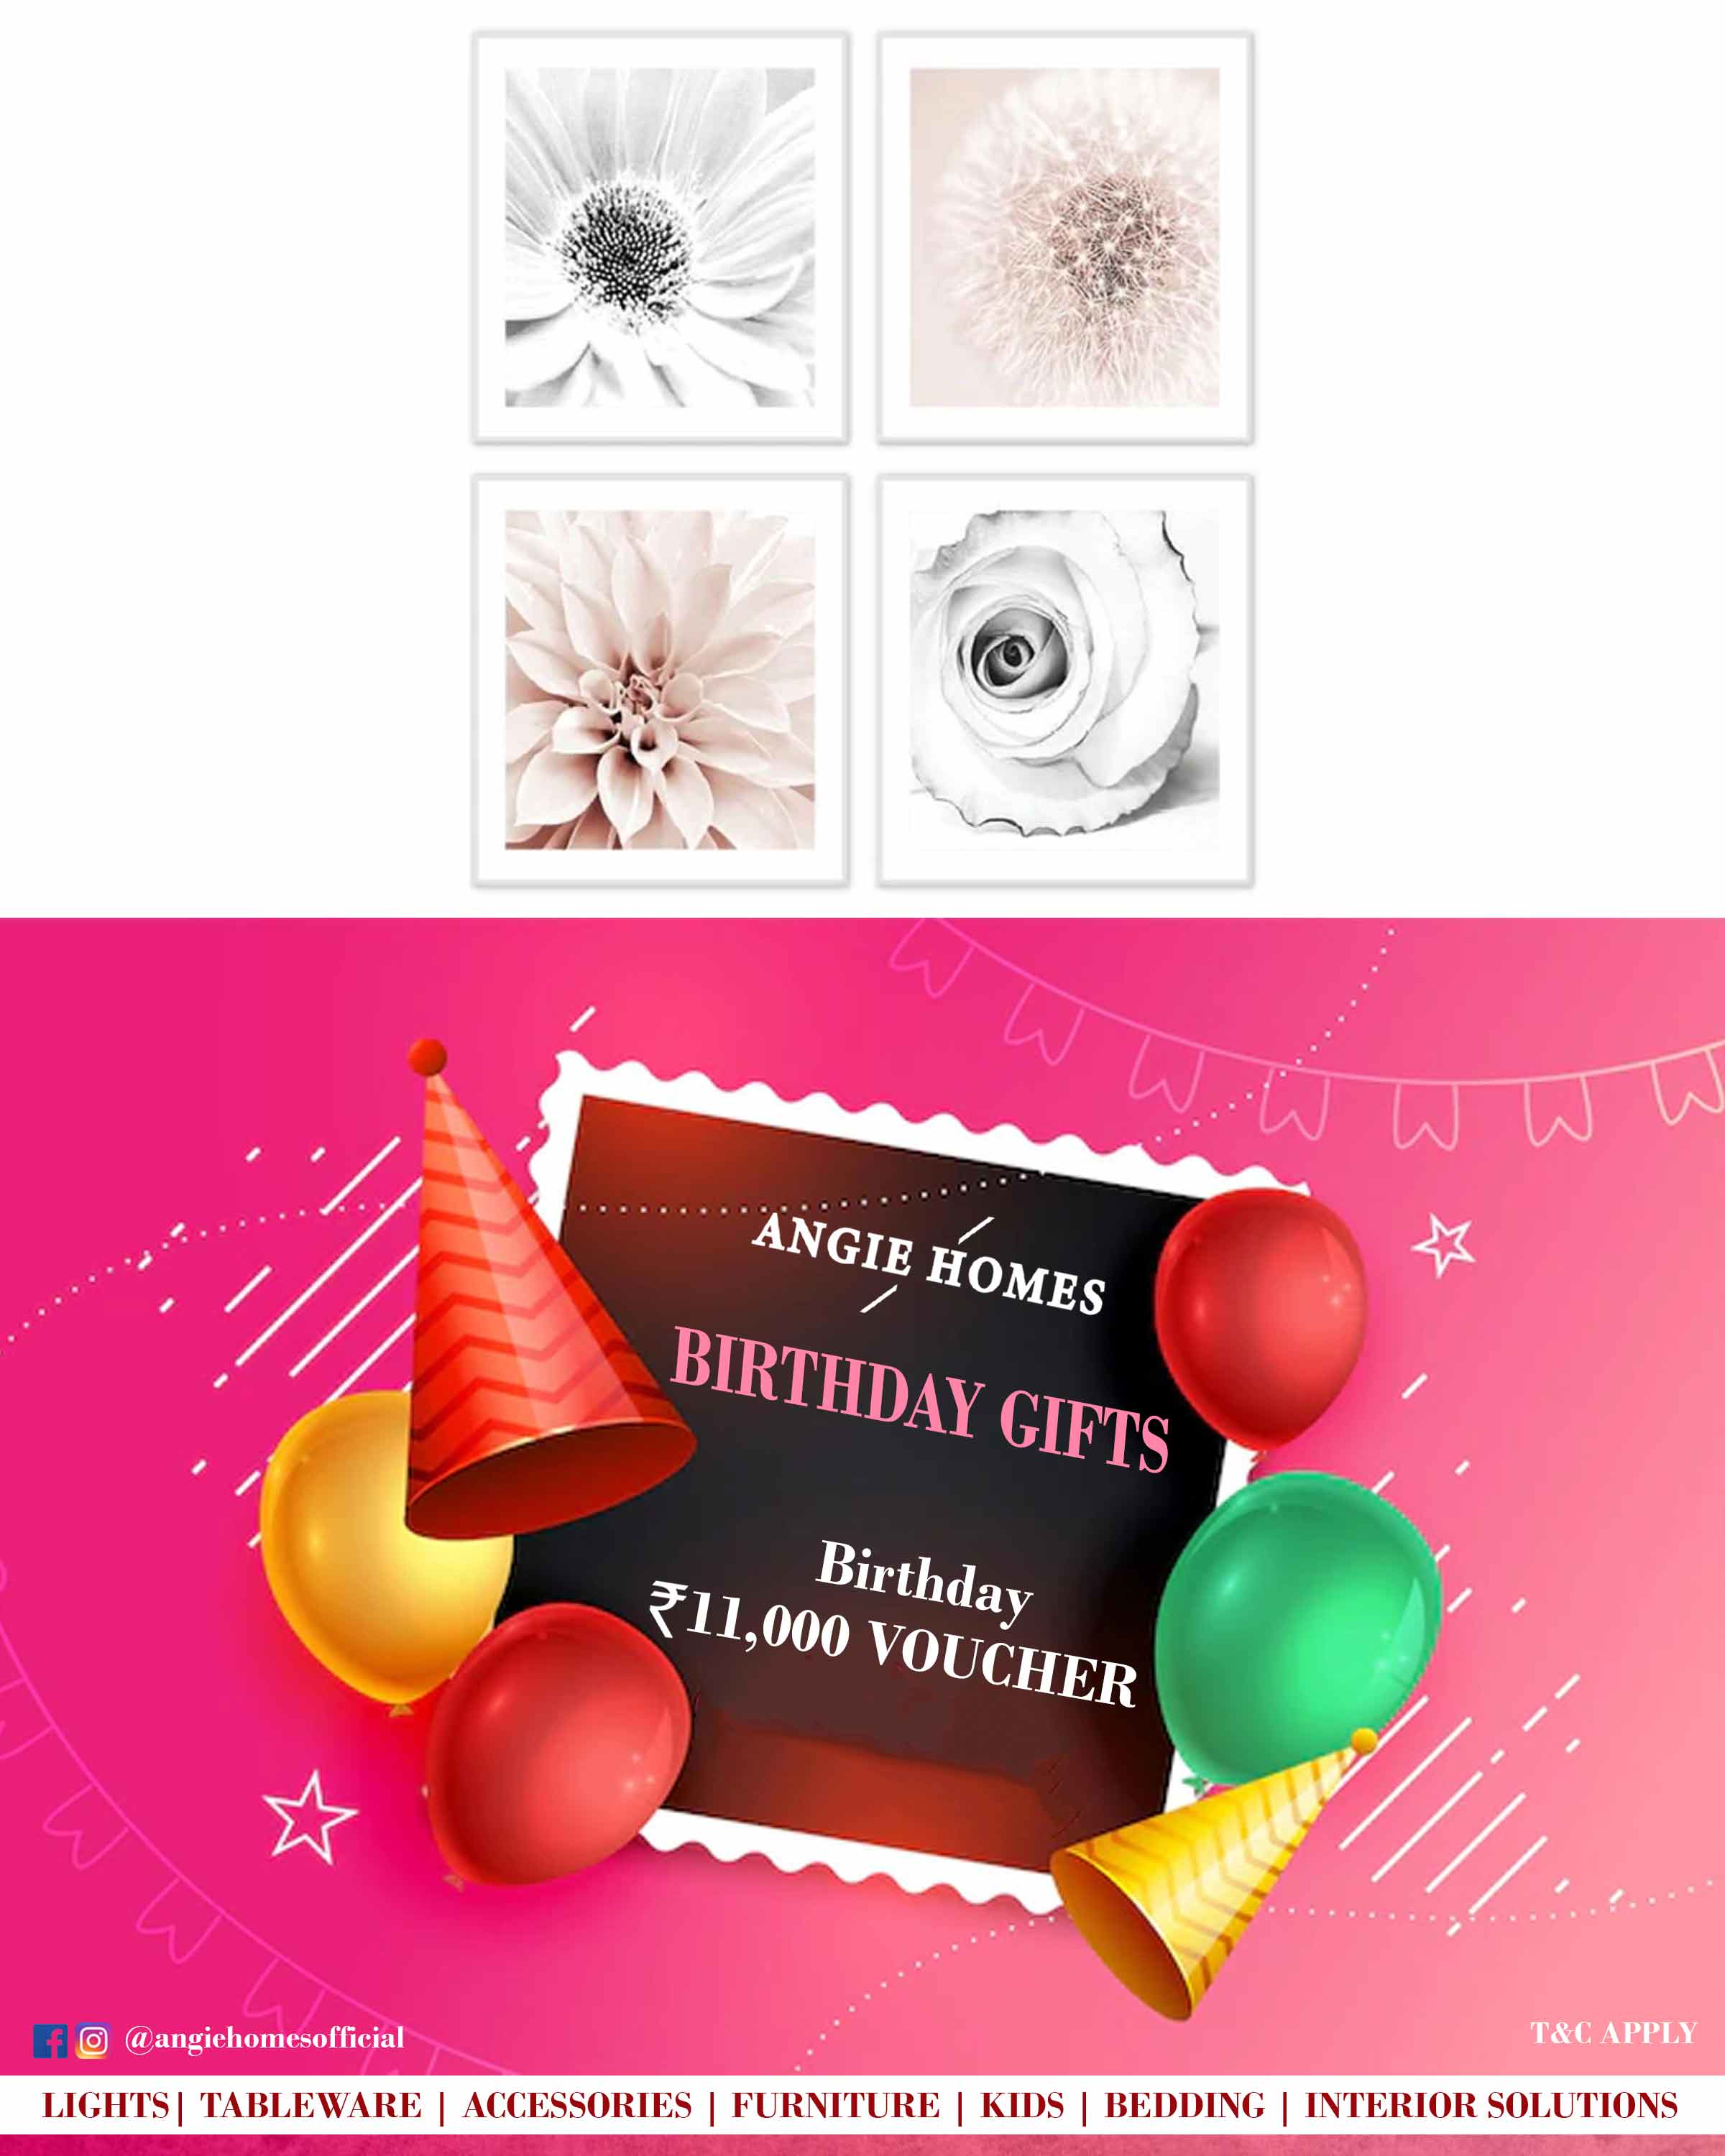 Birthday Gifts Card Voucher for Multi Design Art Work ANGIE HOMES